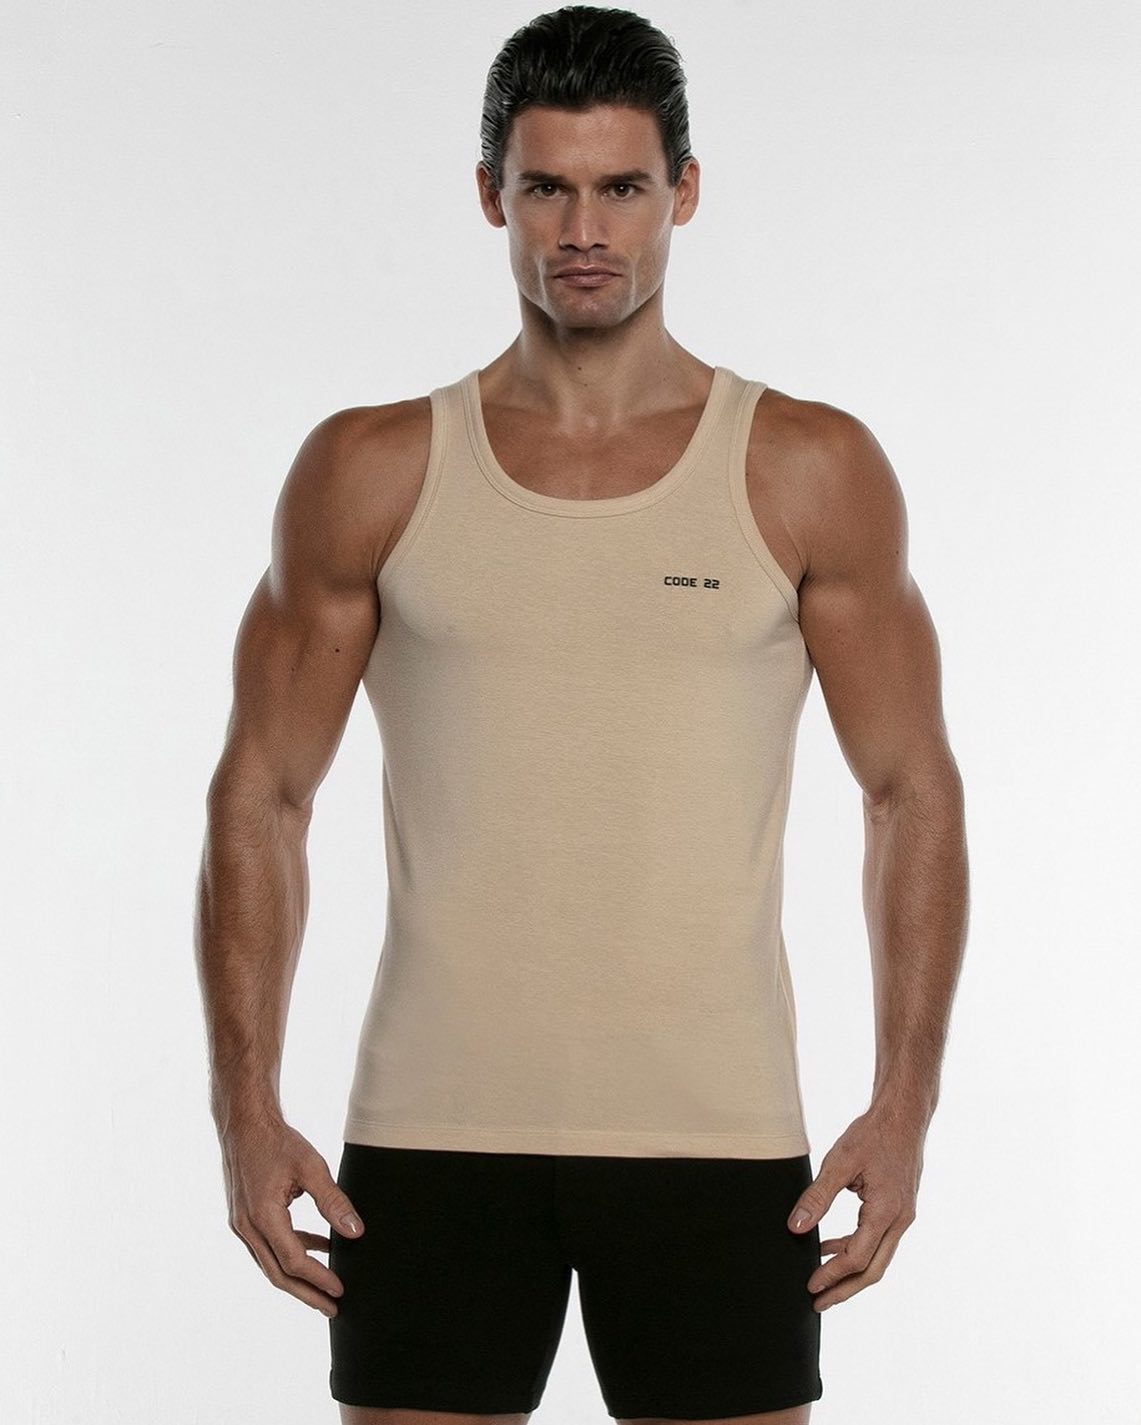 The Basics Tanktop of CODE 22 is a versatile and stylish essential top, made with the finest fabric, feeling very comfortable against the skin. Available in beige (photo), grey, black or white: 
____
https://menandunderwear.com/shop/tops/code-22-basics-tanktop-beige